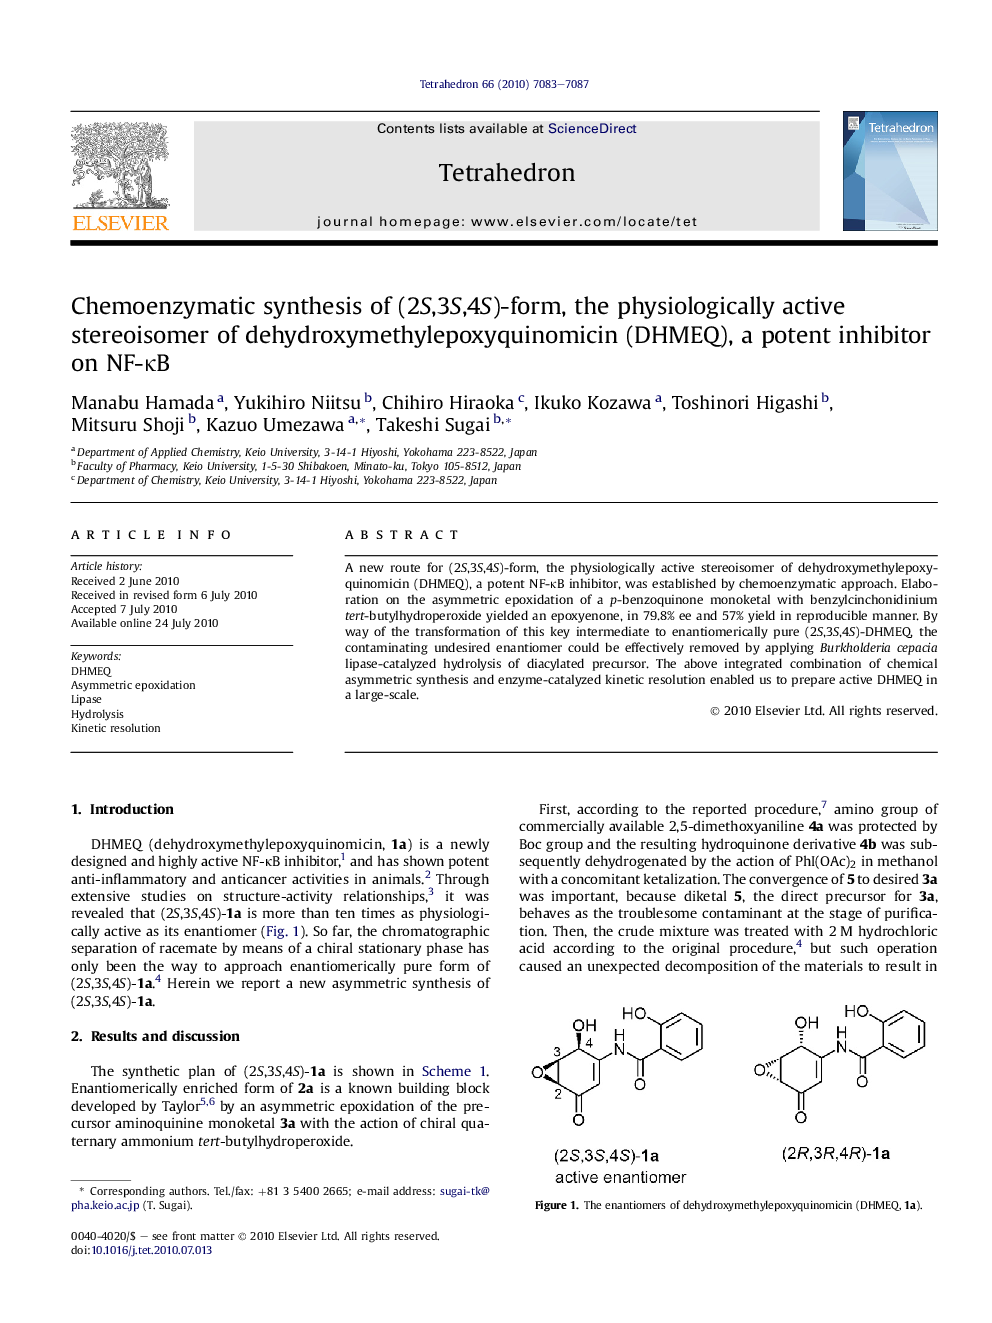 Chemoenzymatic synthesis of (2S,3S,4S)-form, the physiologically active stereoisomer of dehydroxymethylepoxyquinomicin (DHMEQ), a potent inhibitor on NF-ÎºB